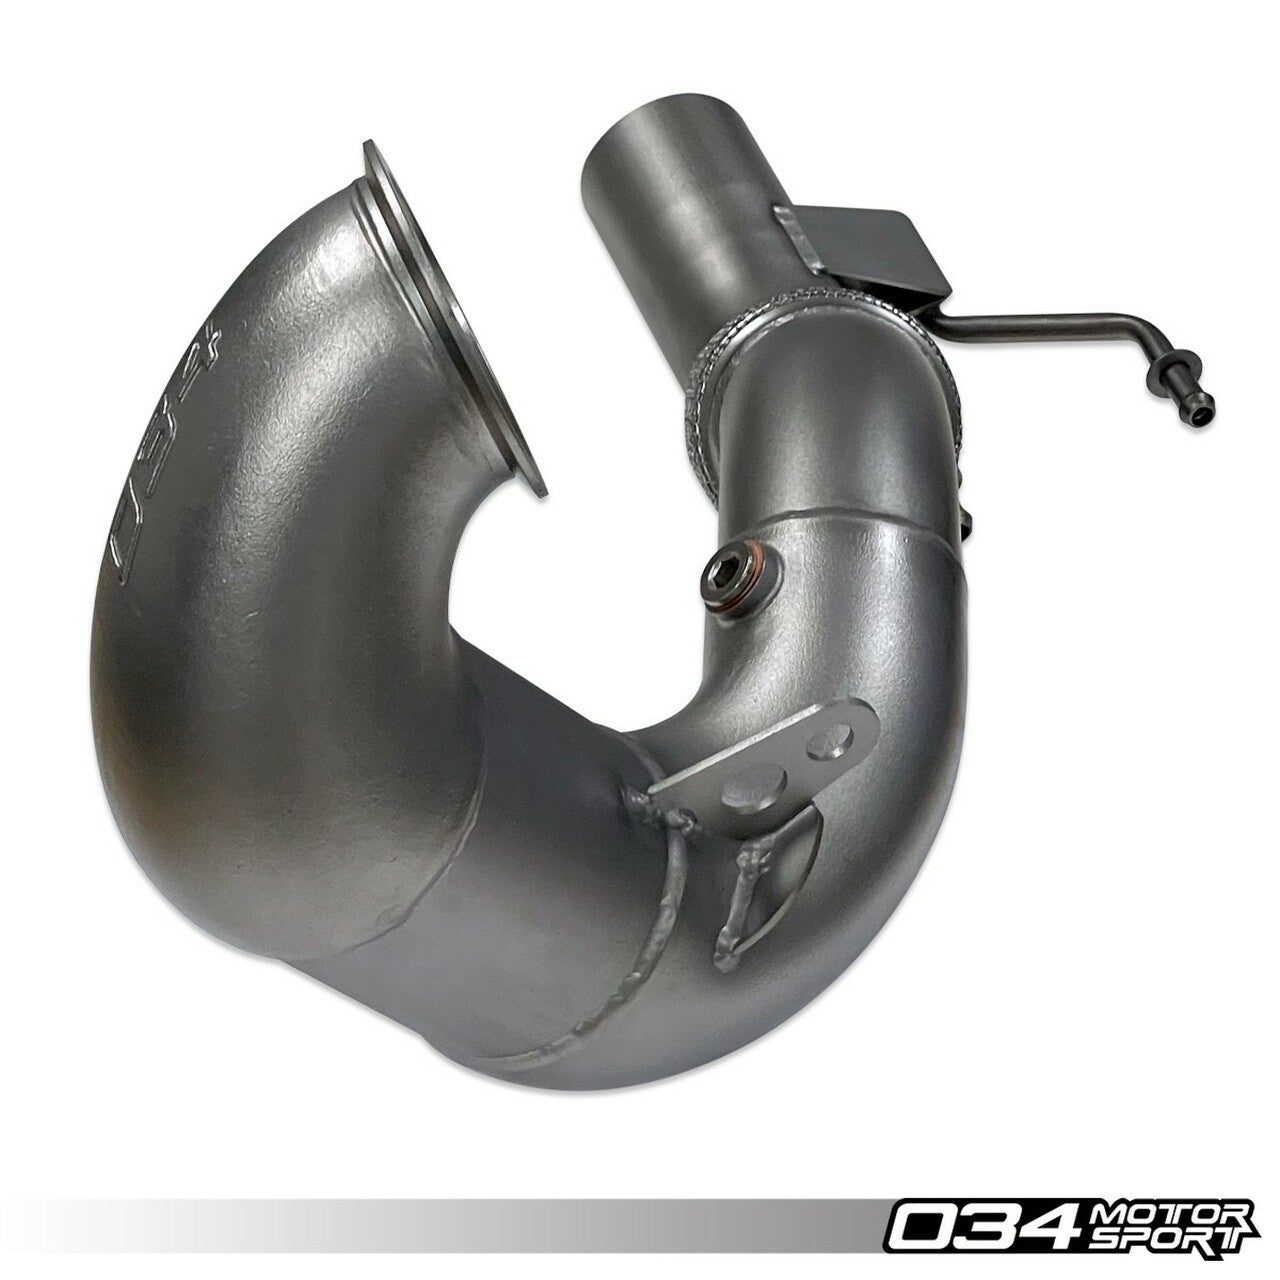 034Motorsport Cast Stainless Steel Performance Downpipe - S3 8V / Golf 7 R 4WD - Wayside Performance